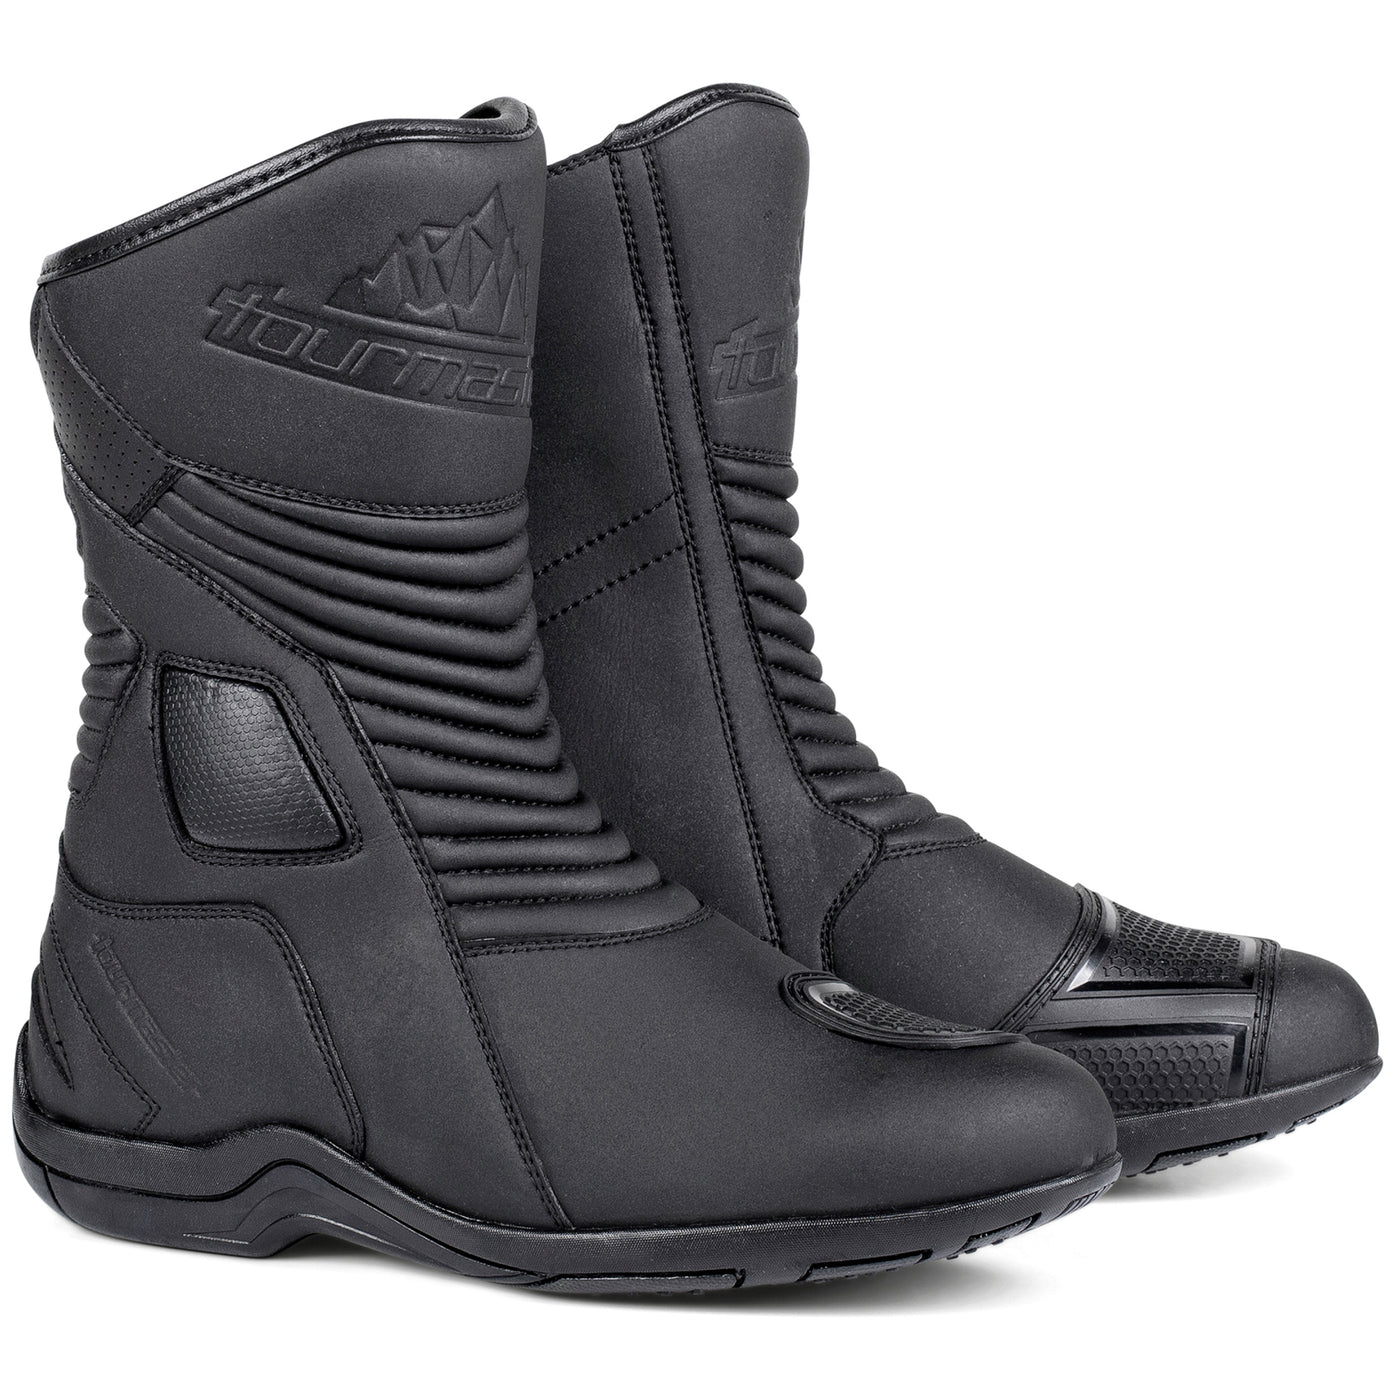 Tourmaster Women's Solution WP Boot